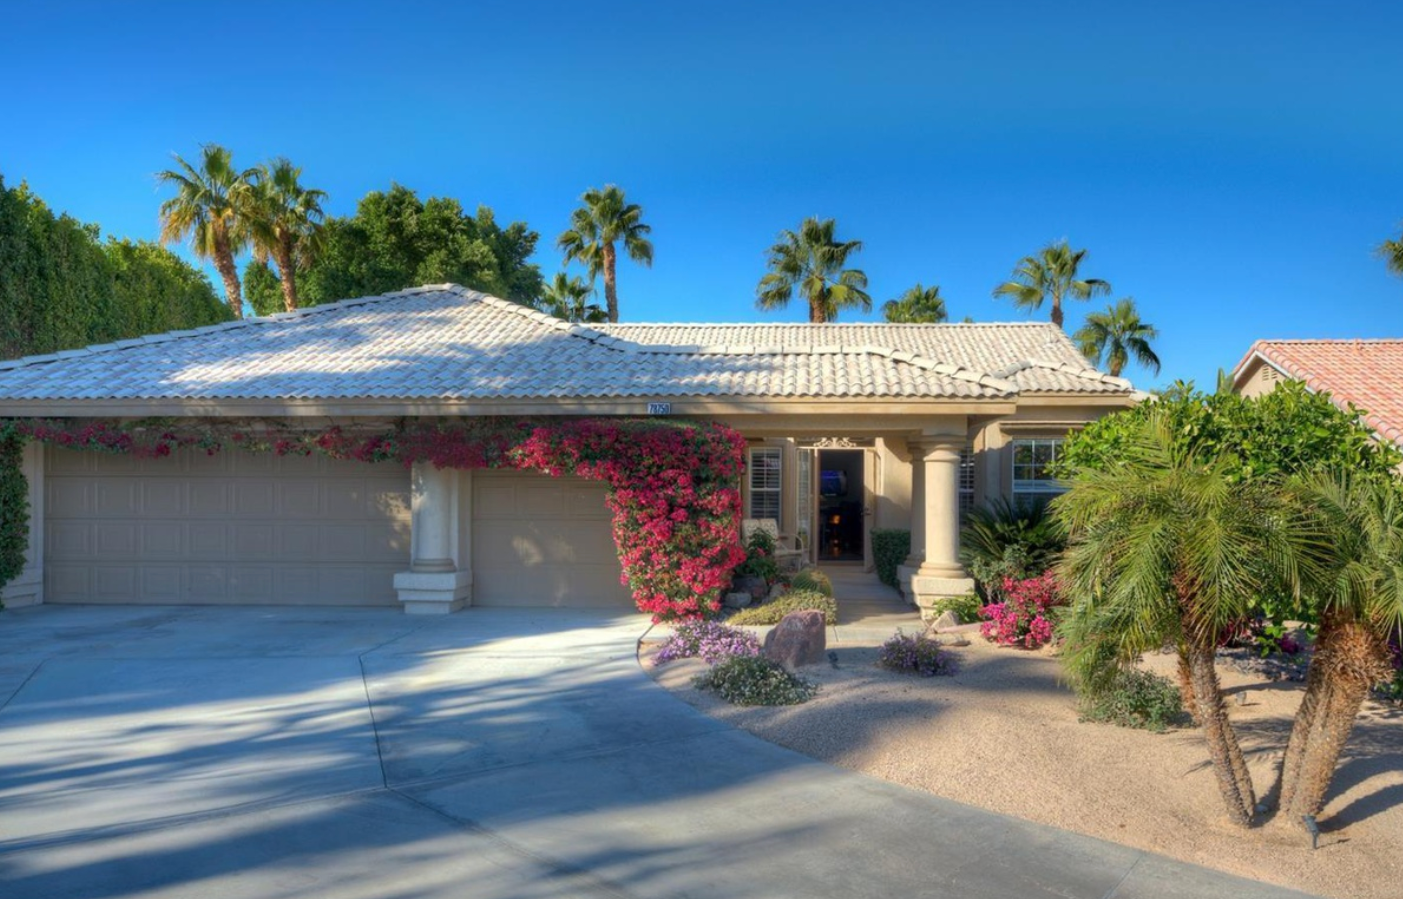 New Vacation Home Opportunity Palm Springs - Desert Mirage